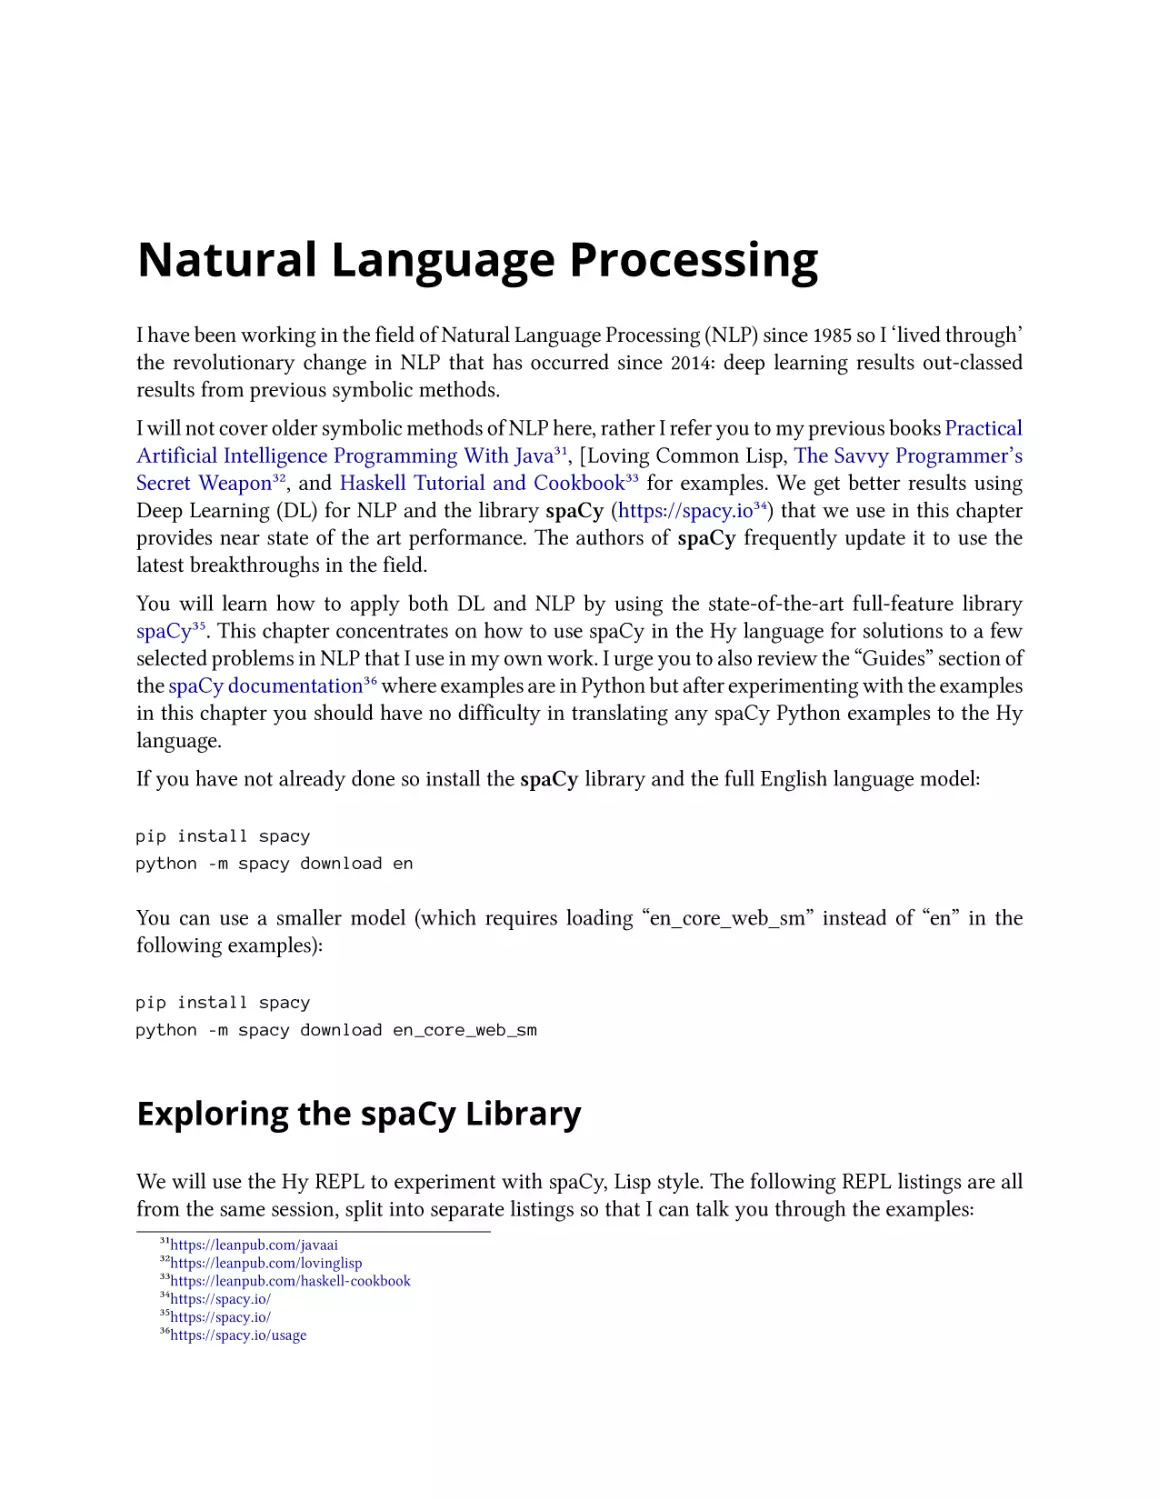 Natural Language Processing
Exploring the spaCy Library